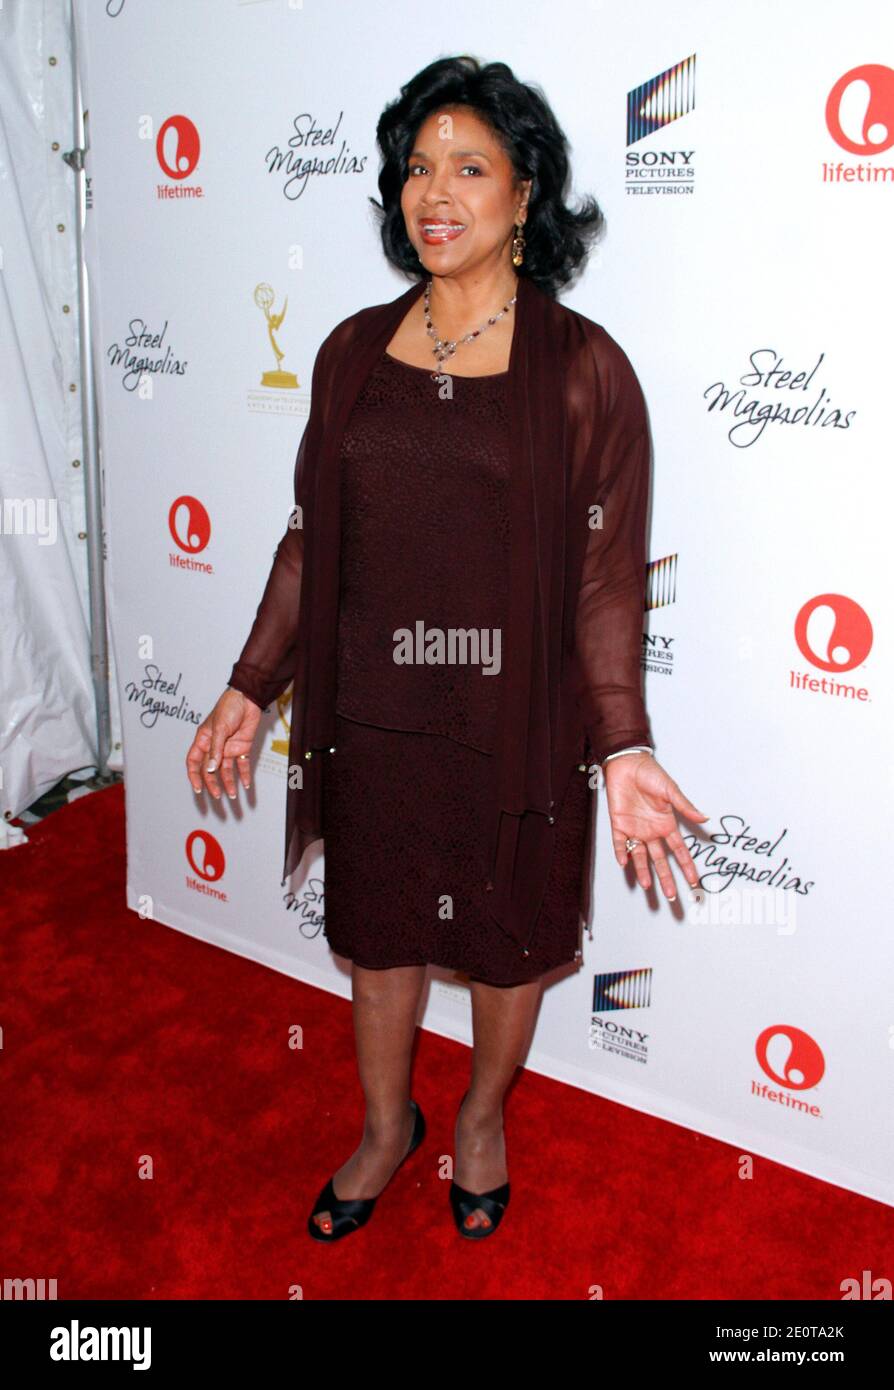 Phylicia Rashad attends the Steel Magnolias Premiere at the Paris Theater in New York City, NY, USA, on October 3, 2012. Photo by Donna Ward/ABACAPRESS.COM Stock Photo